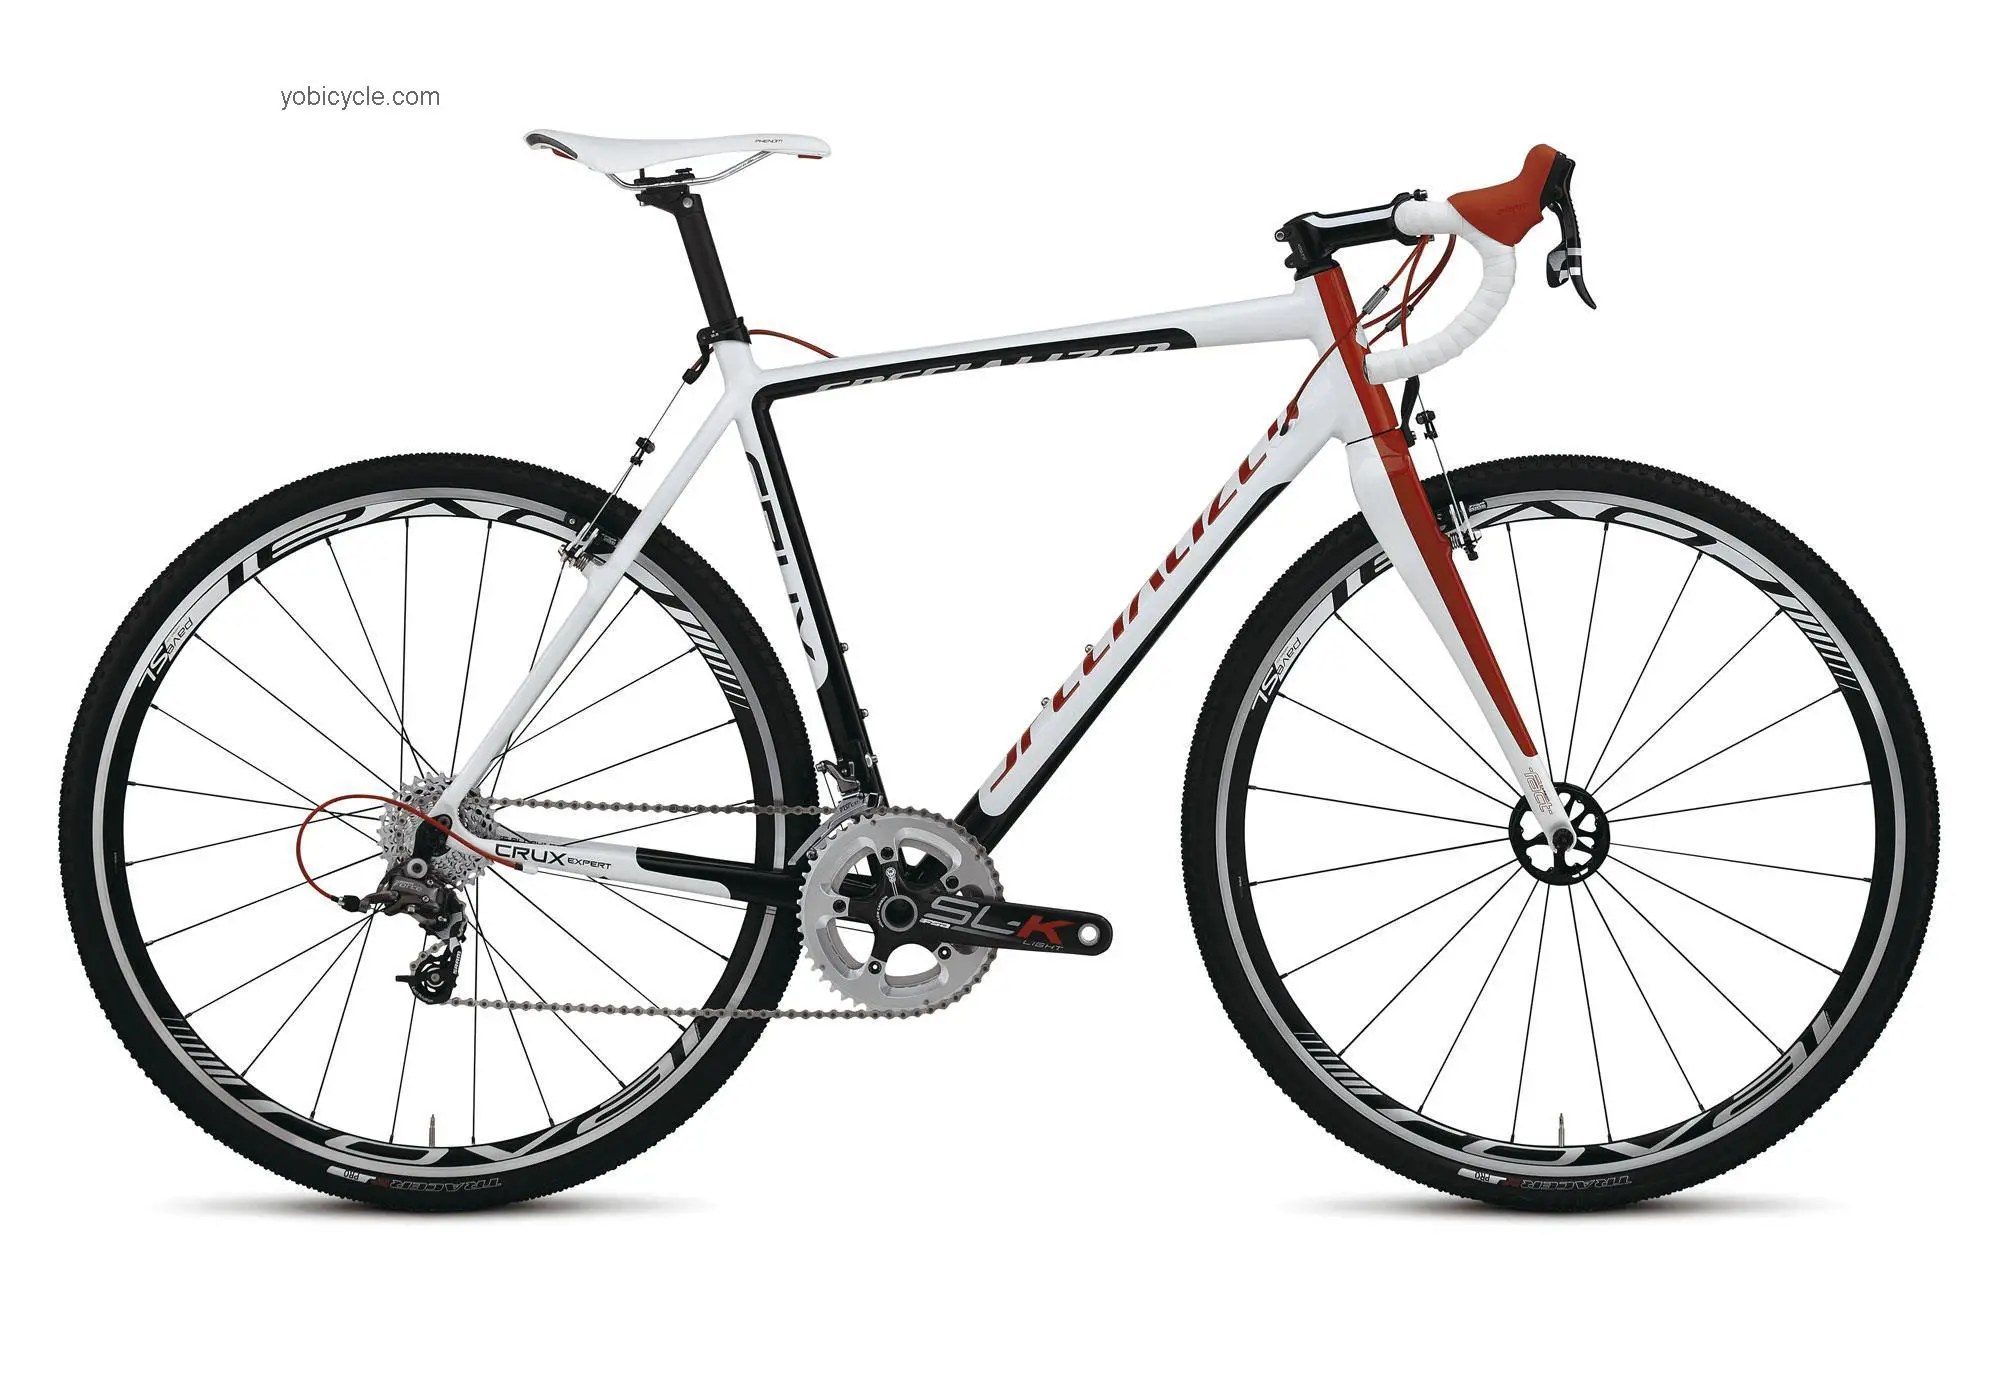 Specialized Crux Expert competitors and comparison tool online specs and performance